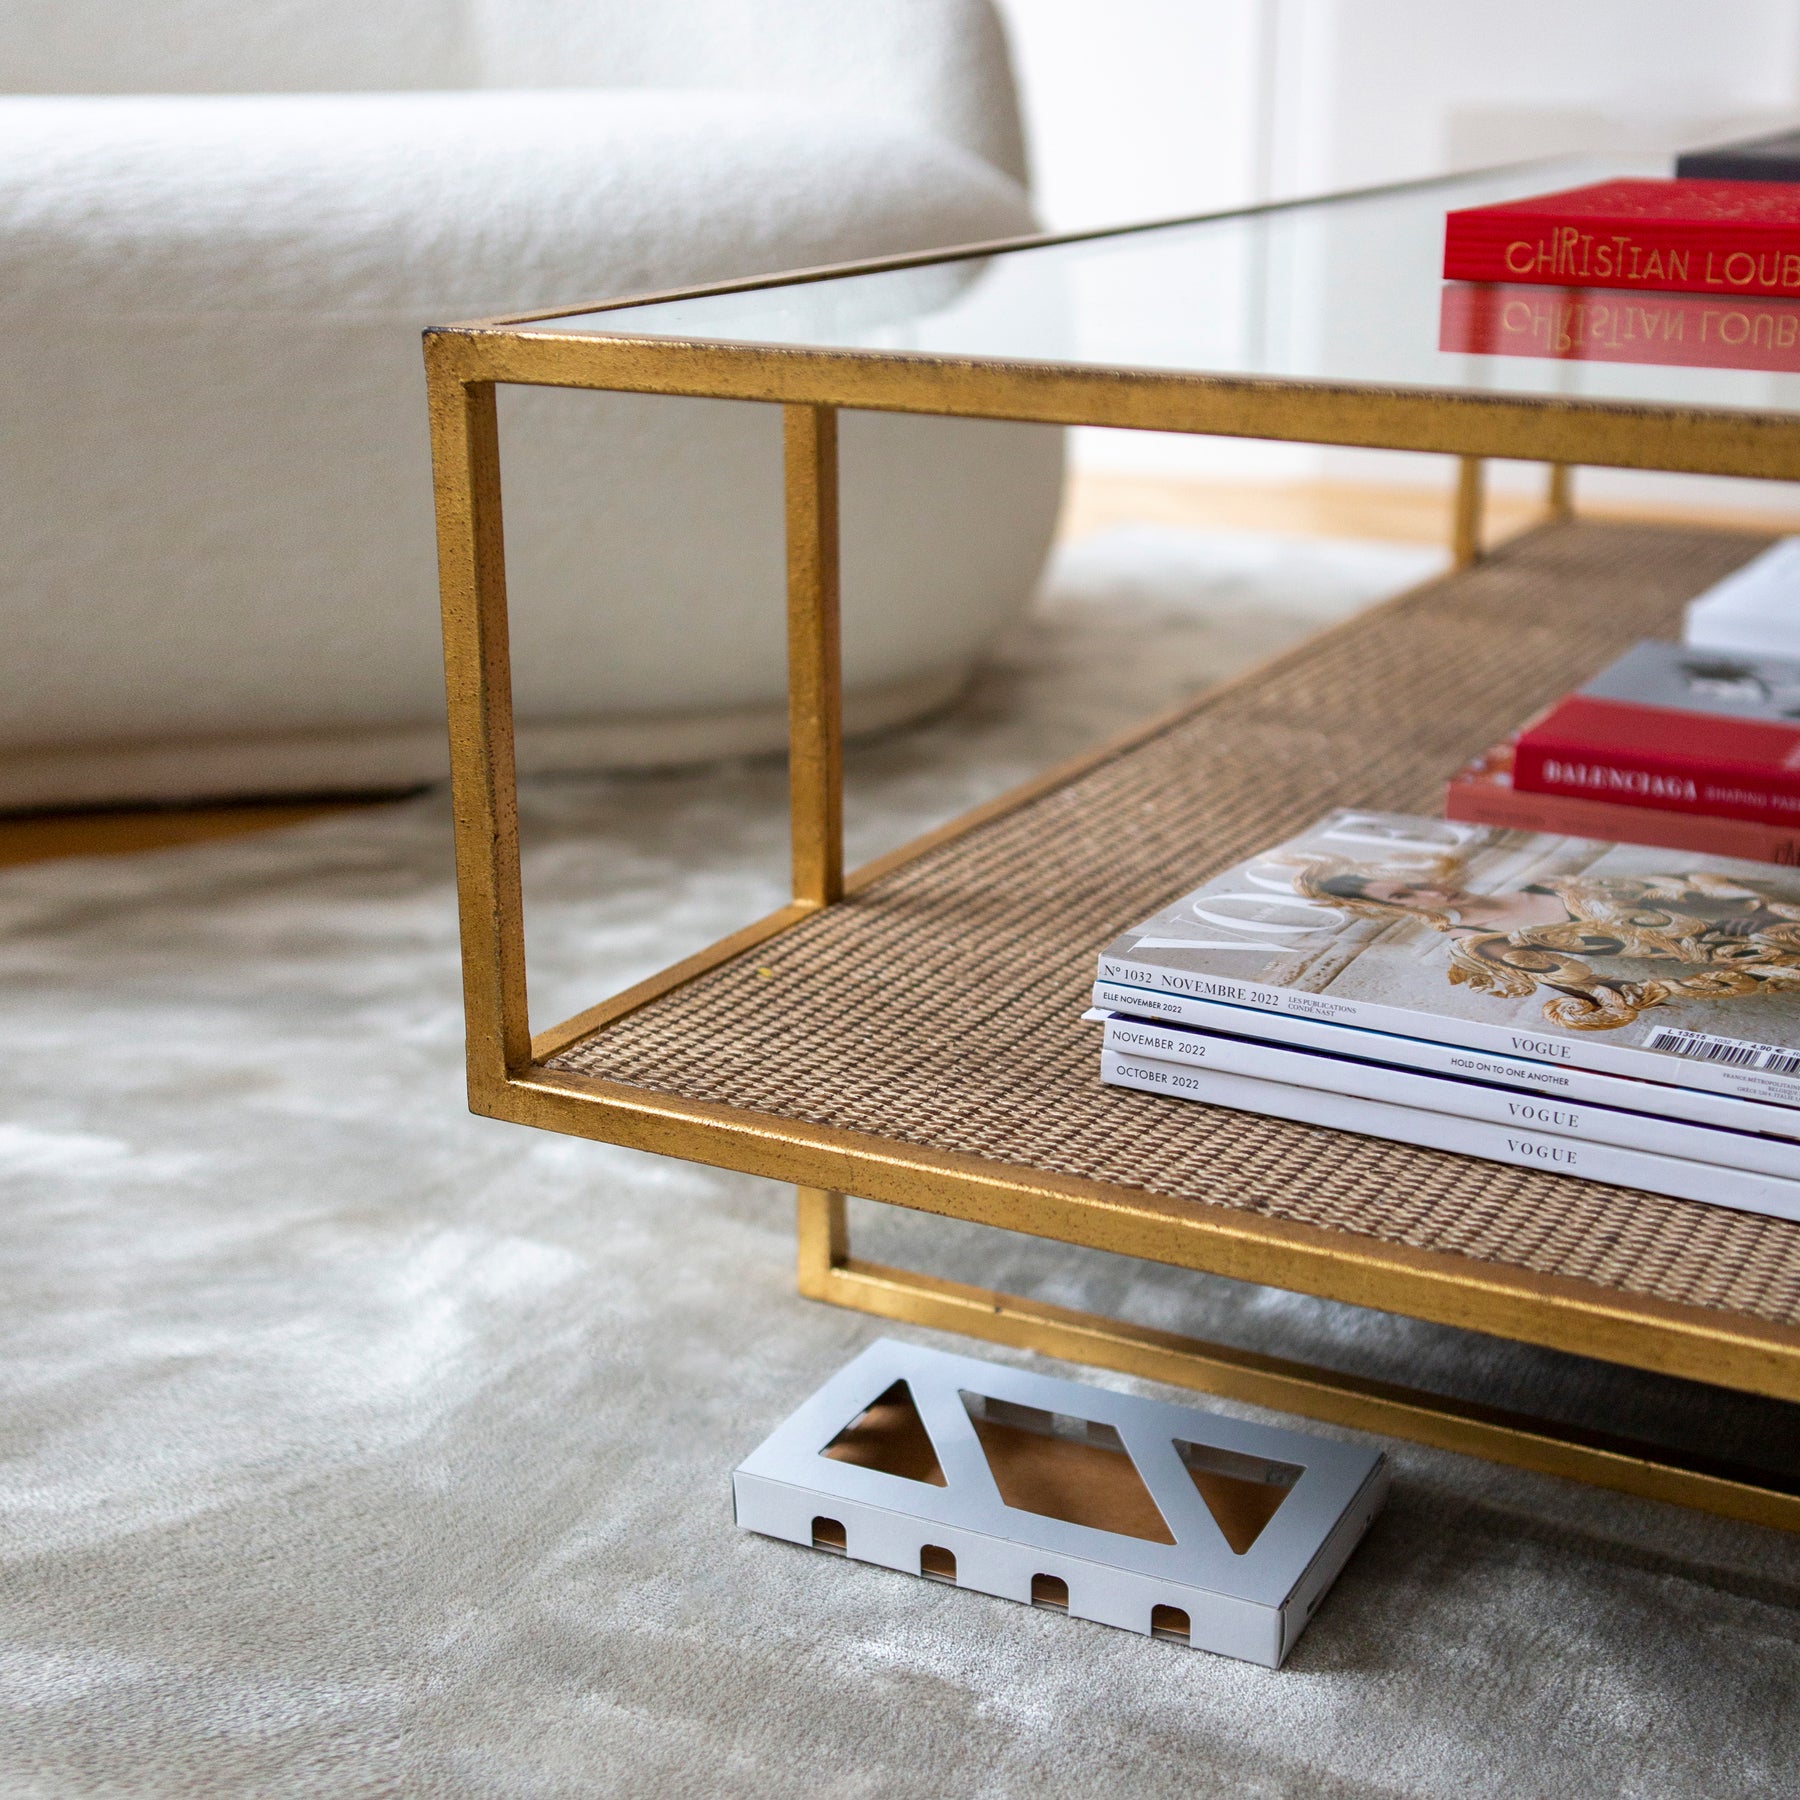 Moth Box placed underneath modern designed table with gold edging and Vogue magazines